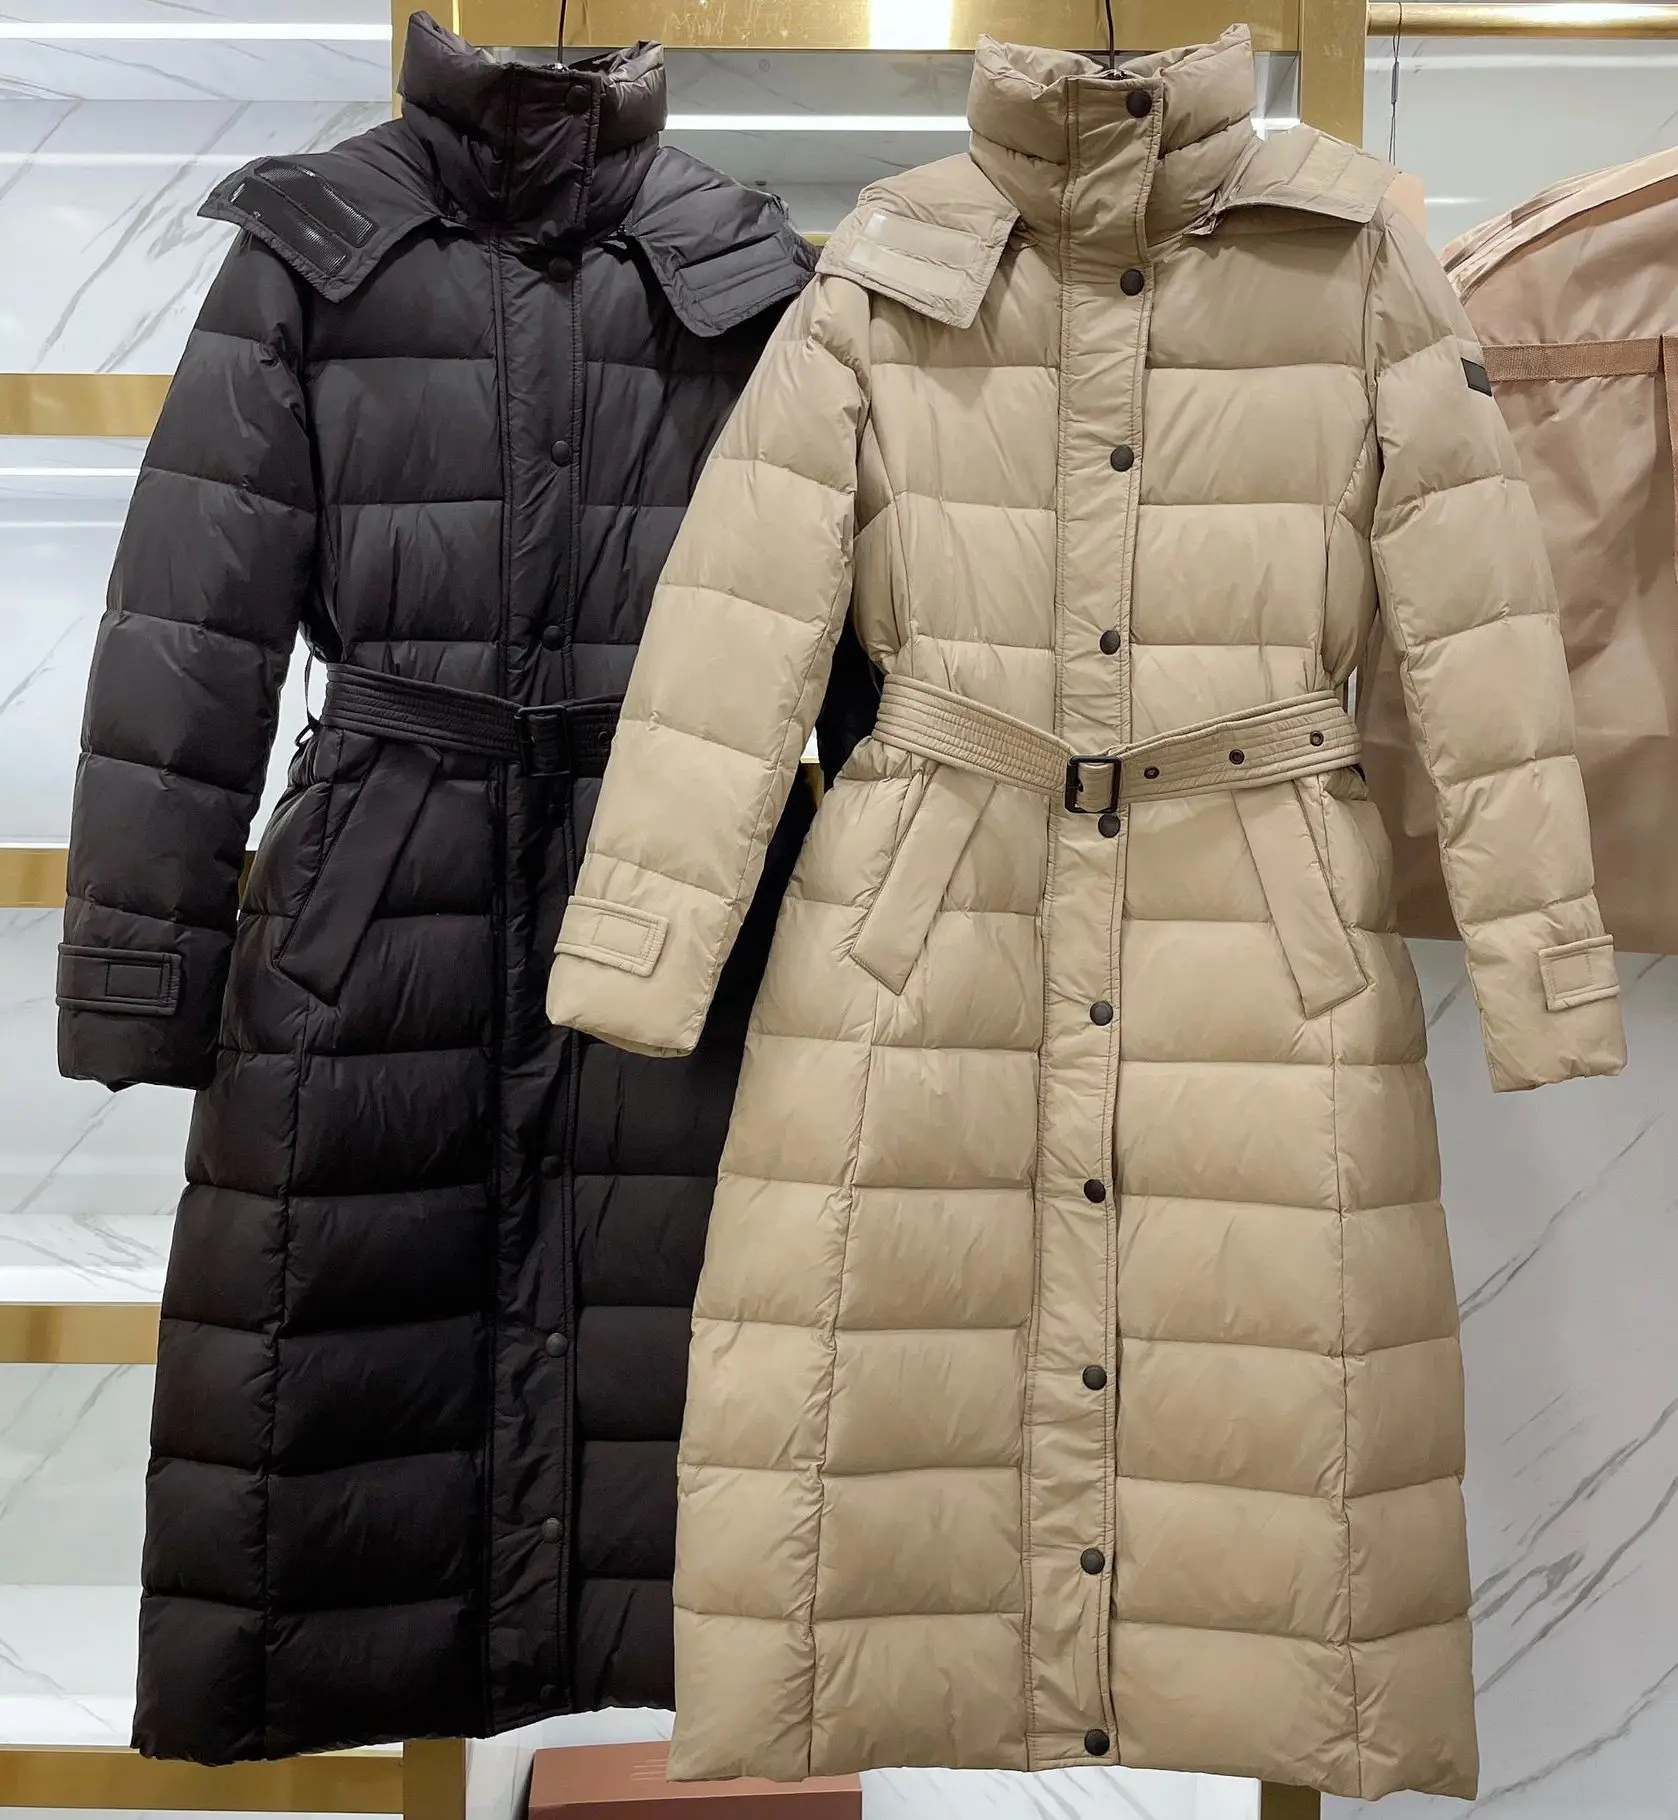 New Fashion Luxury Long winter ladies down jacket with hat and belt, white goose down jacket, warm and cold proof enlarge